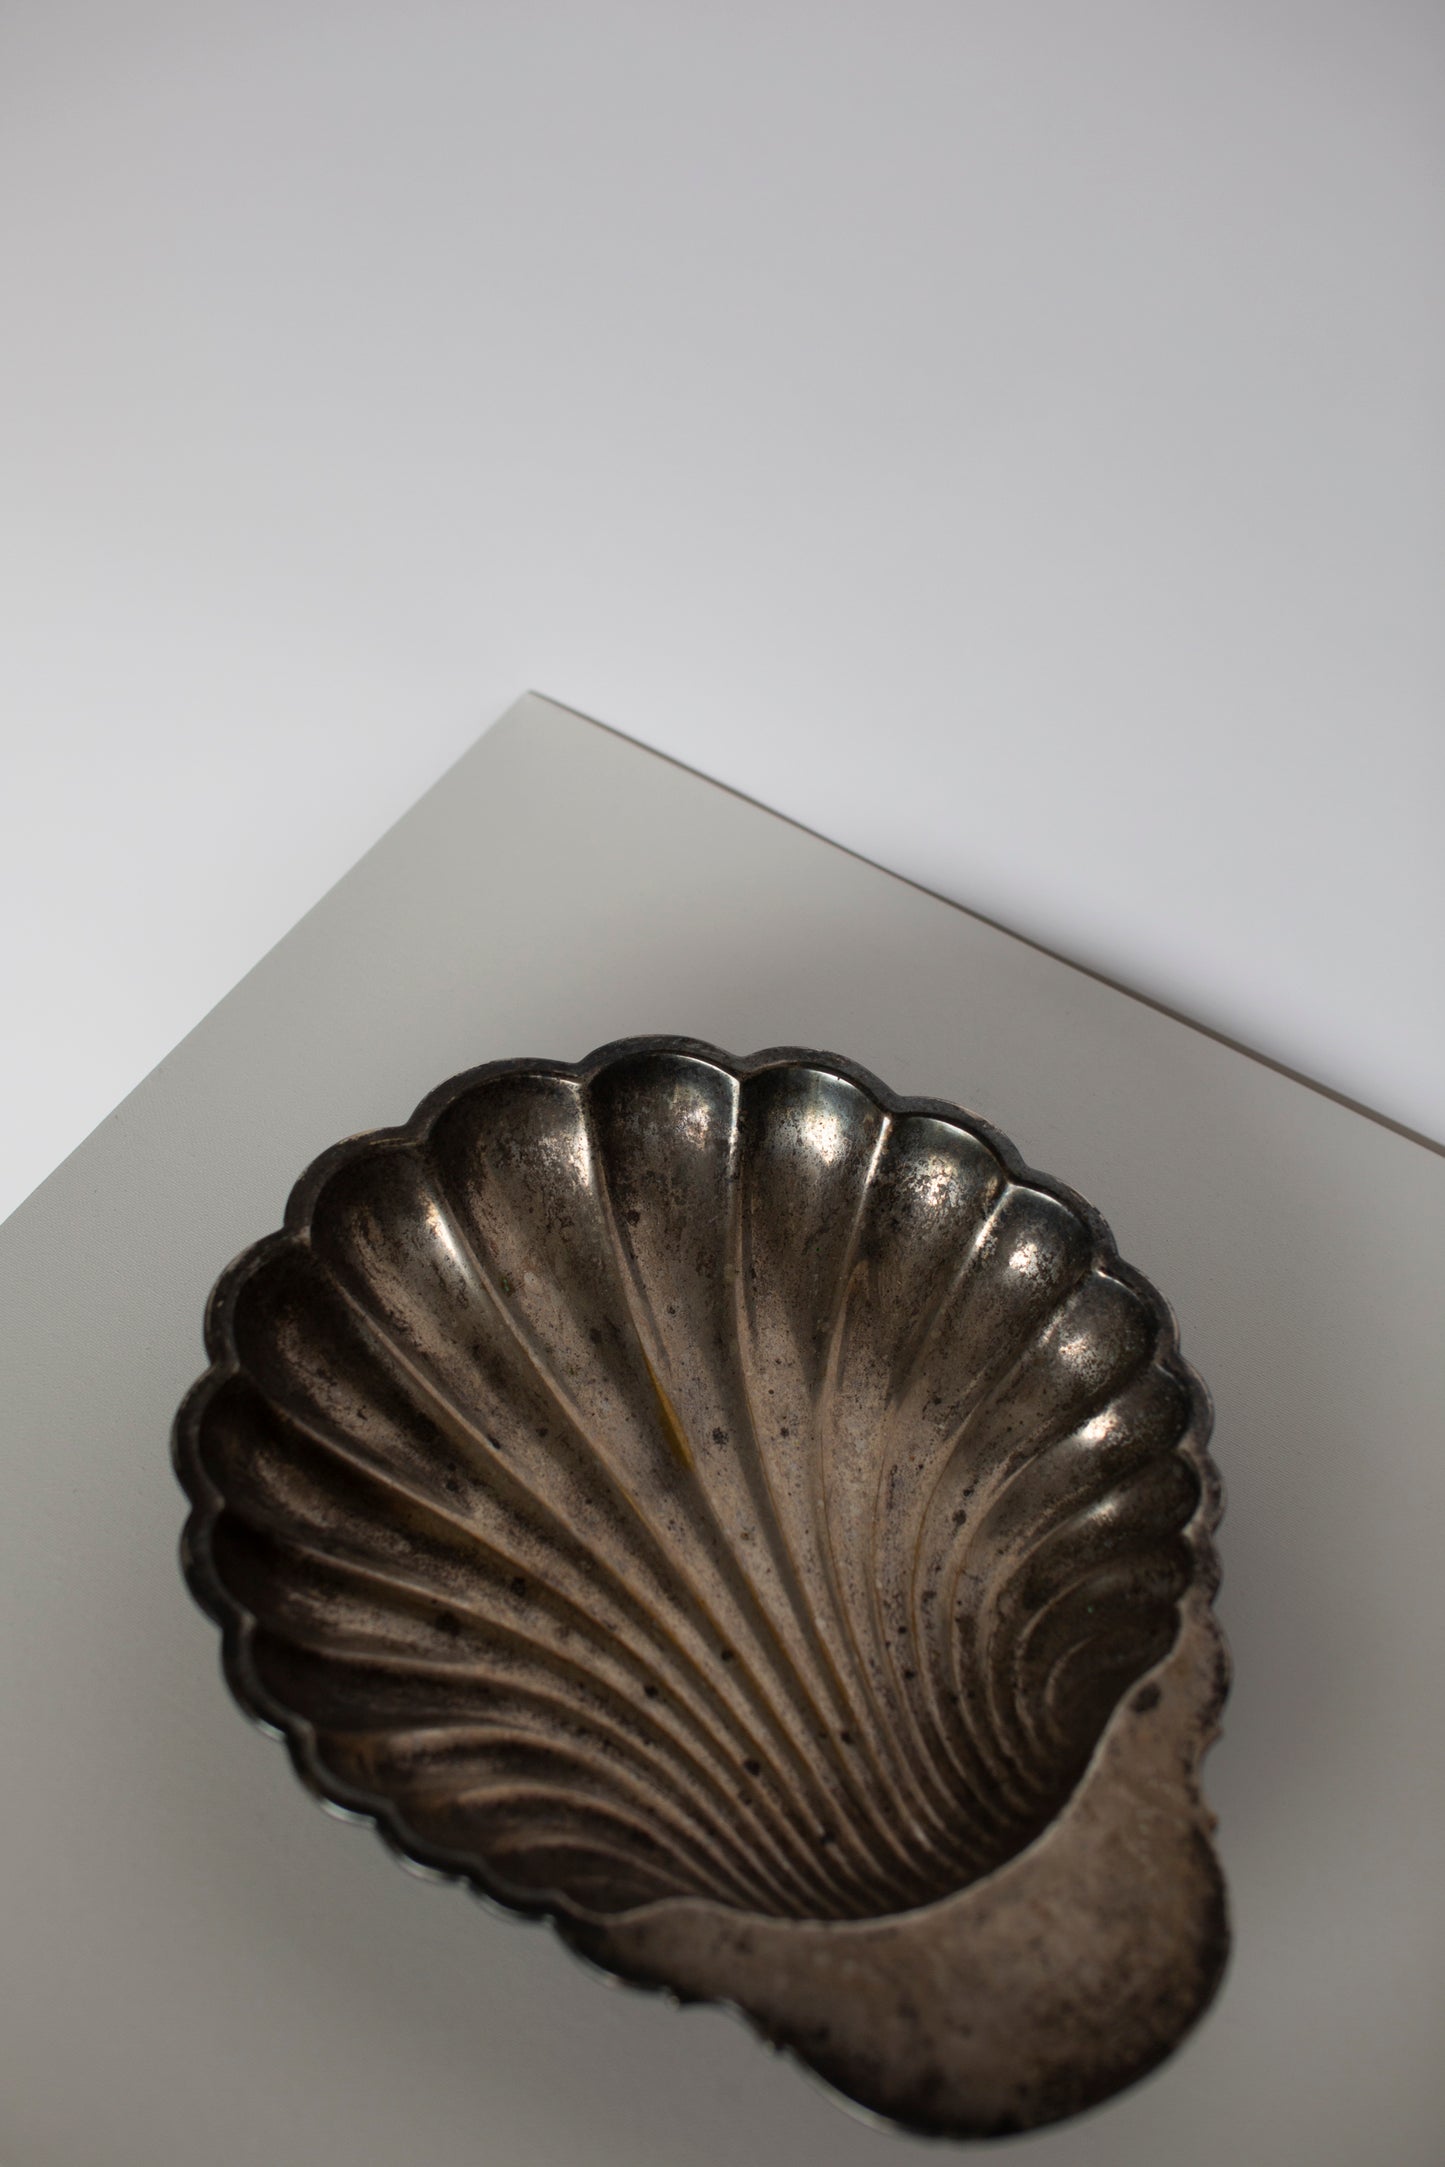 Scallop shaped bowl art deco style